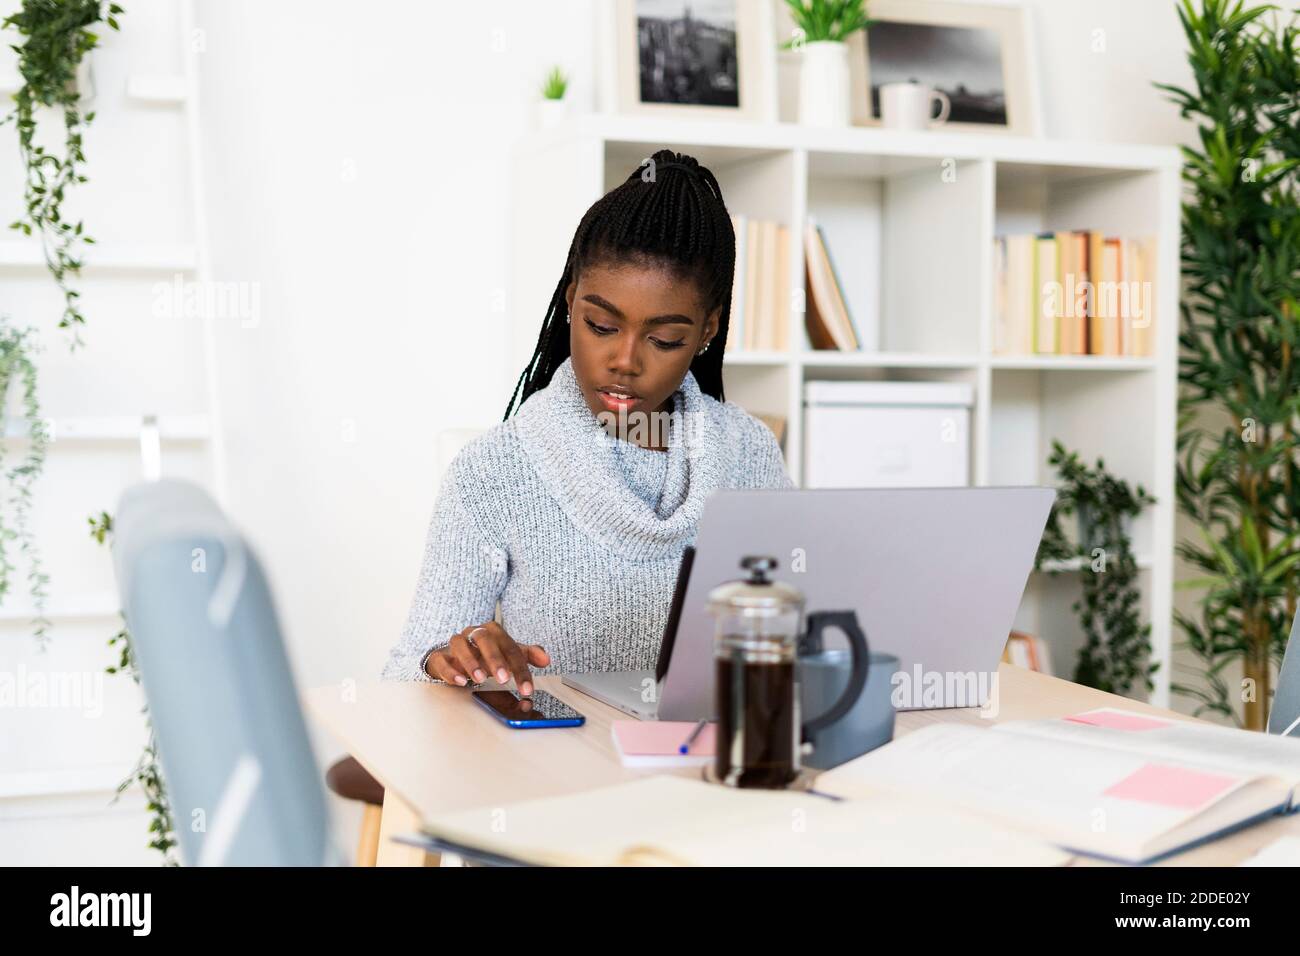 Young female student using smart phone while studying through laptop sitting in living room at home Stock Photo